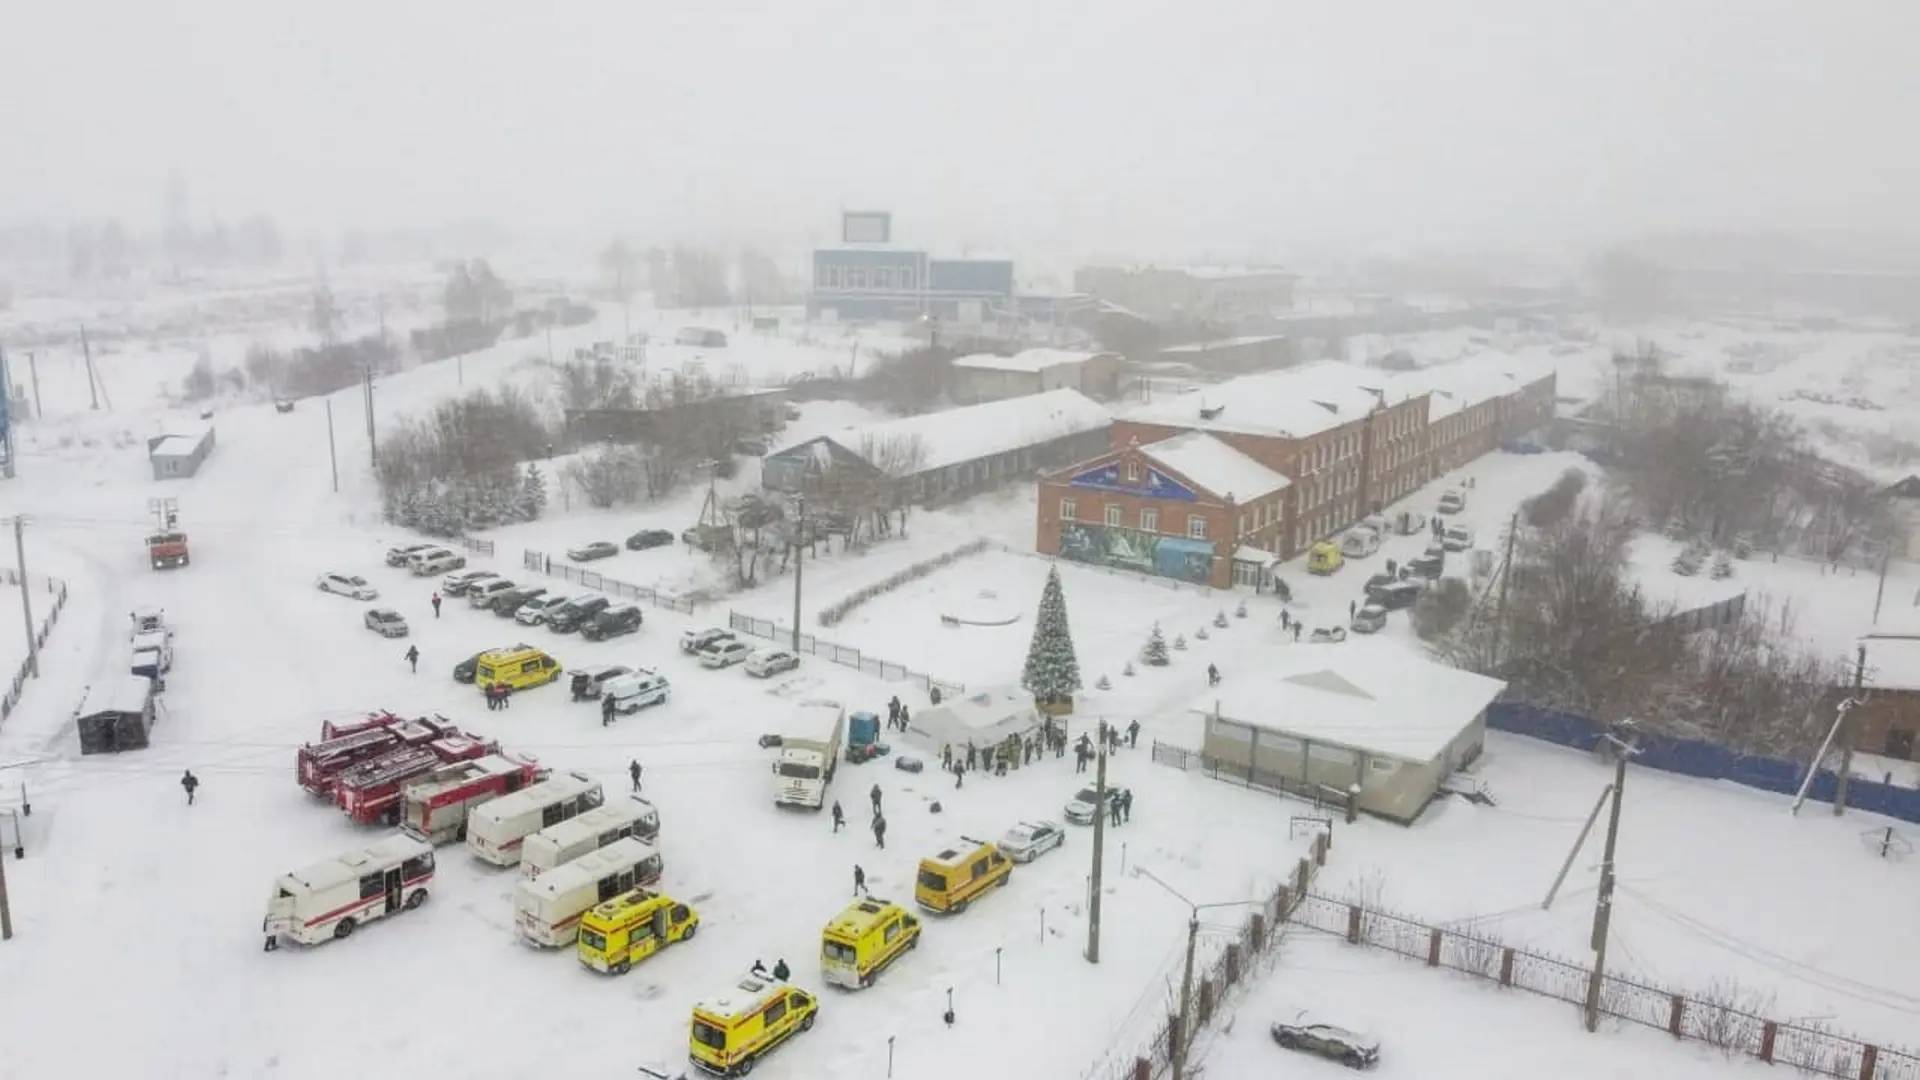 This is what the Siberian prison in Kharp where Navalny died looks like: it is known as 'polar wolf'